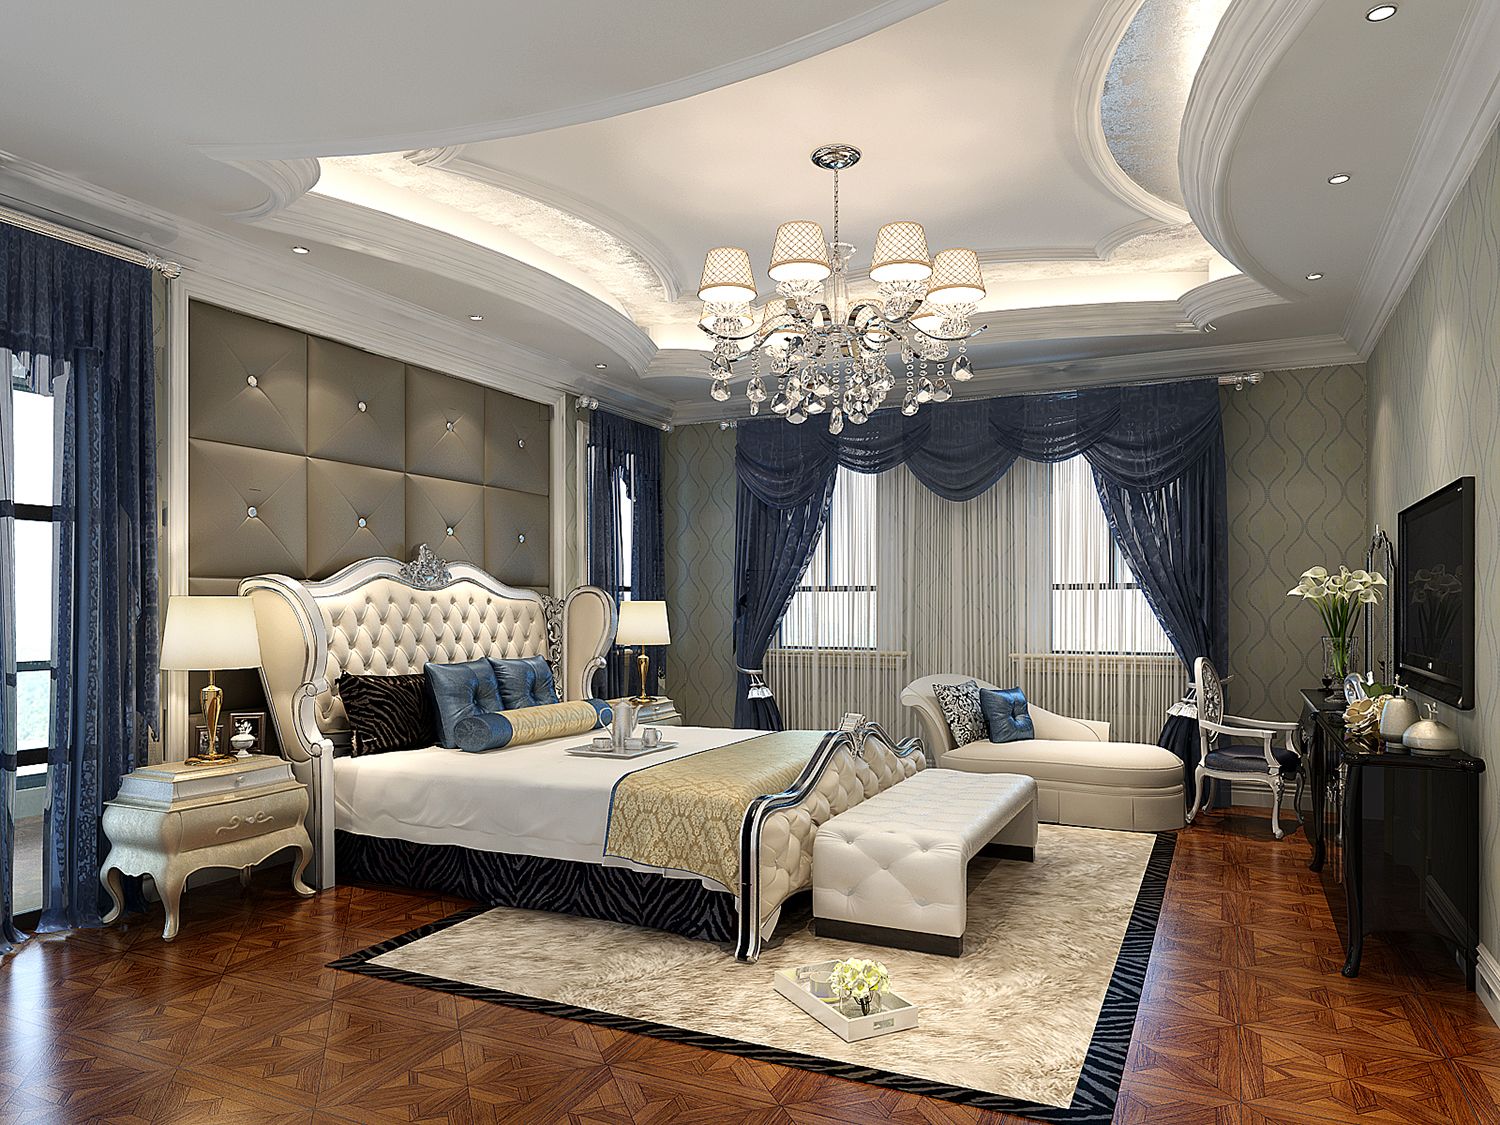 Ceiling Harmony: Blending Your Bedroom Ceiling With Overall Decor